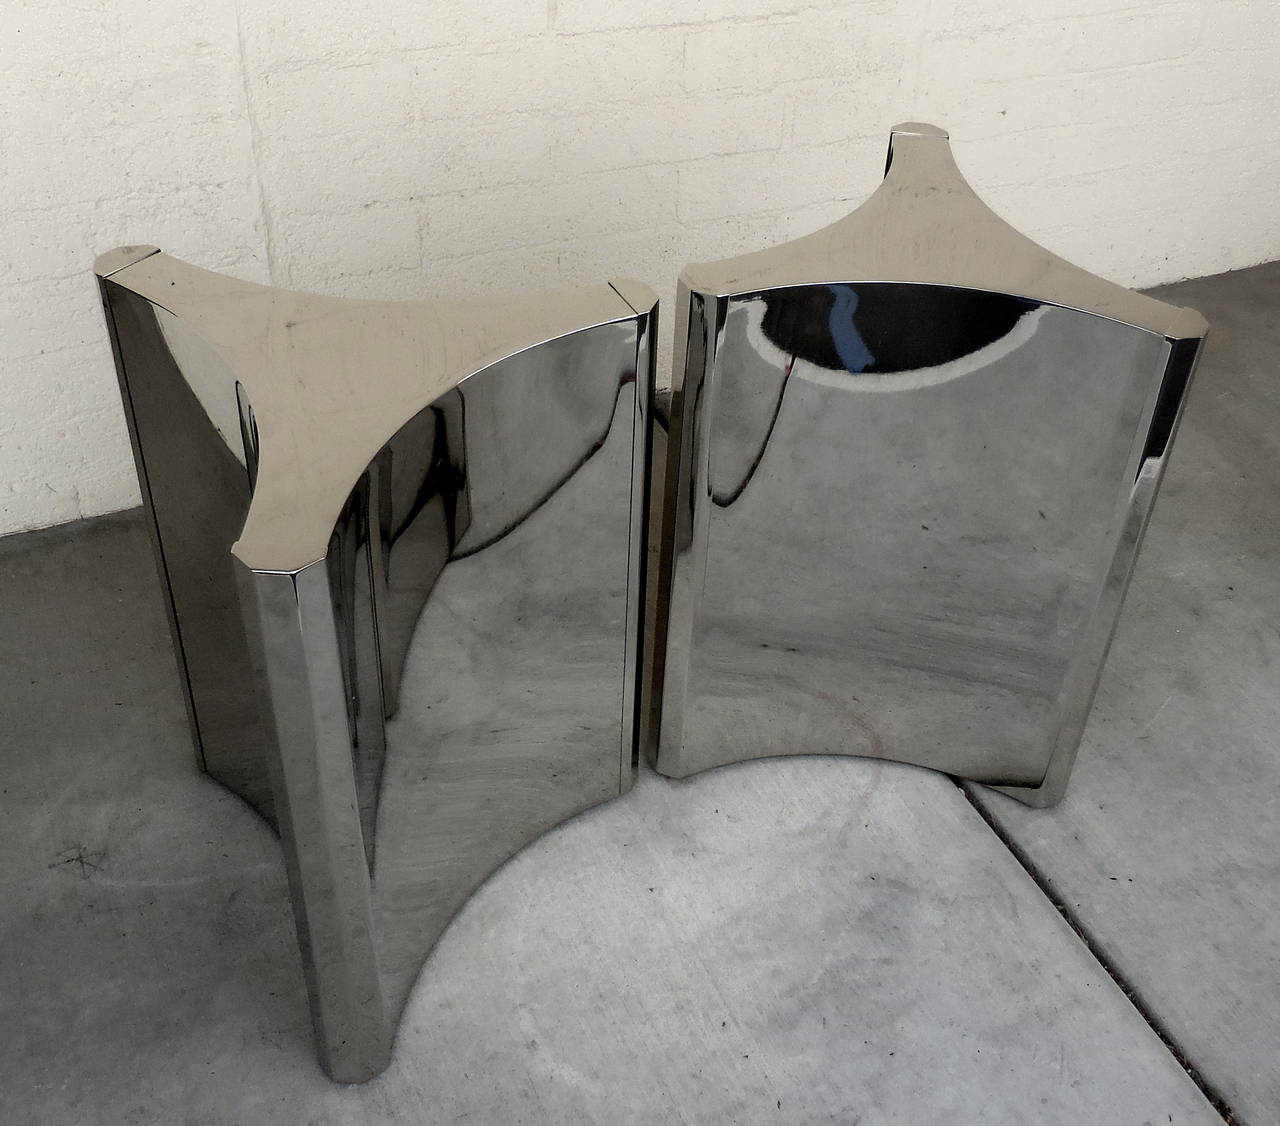 A newly nickel-plated pair of vintage steel trilobi table bases made by Mastercraft in the 1970s. These particular Mastercraft table bases are usually brass-plated. The addition of the polished nickel-plating on this base creates gleaming, mirror